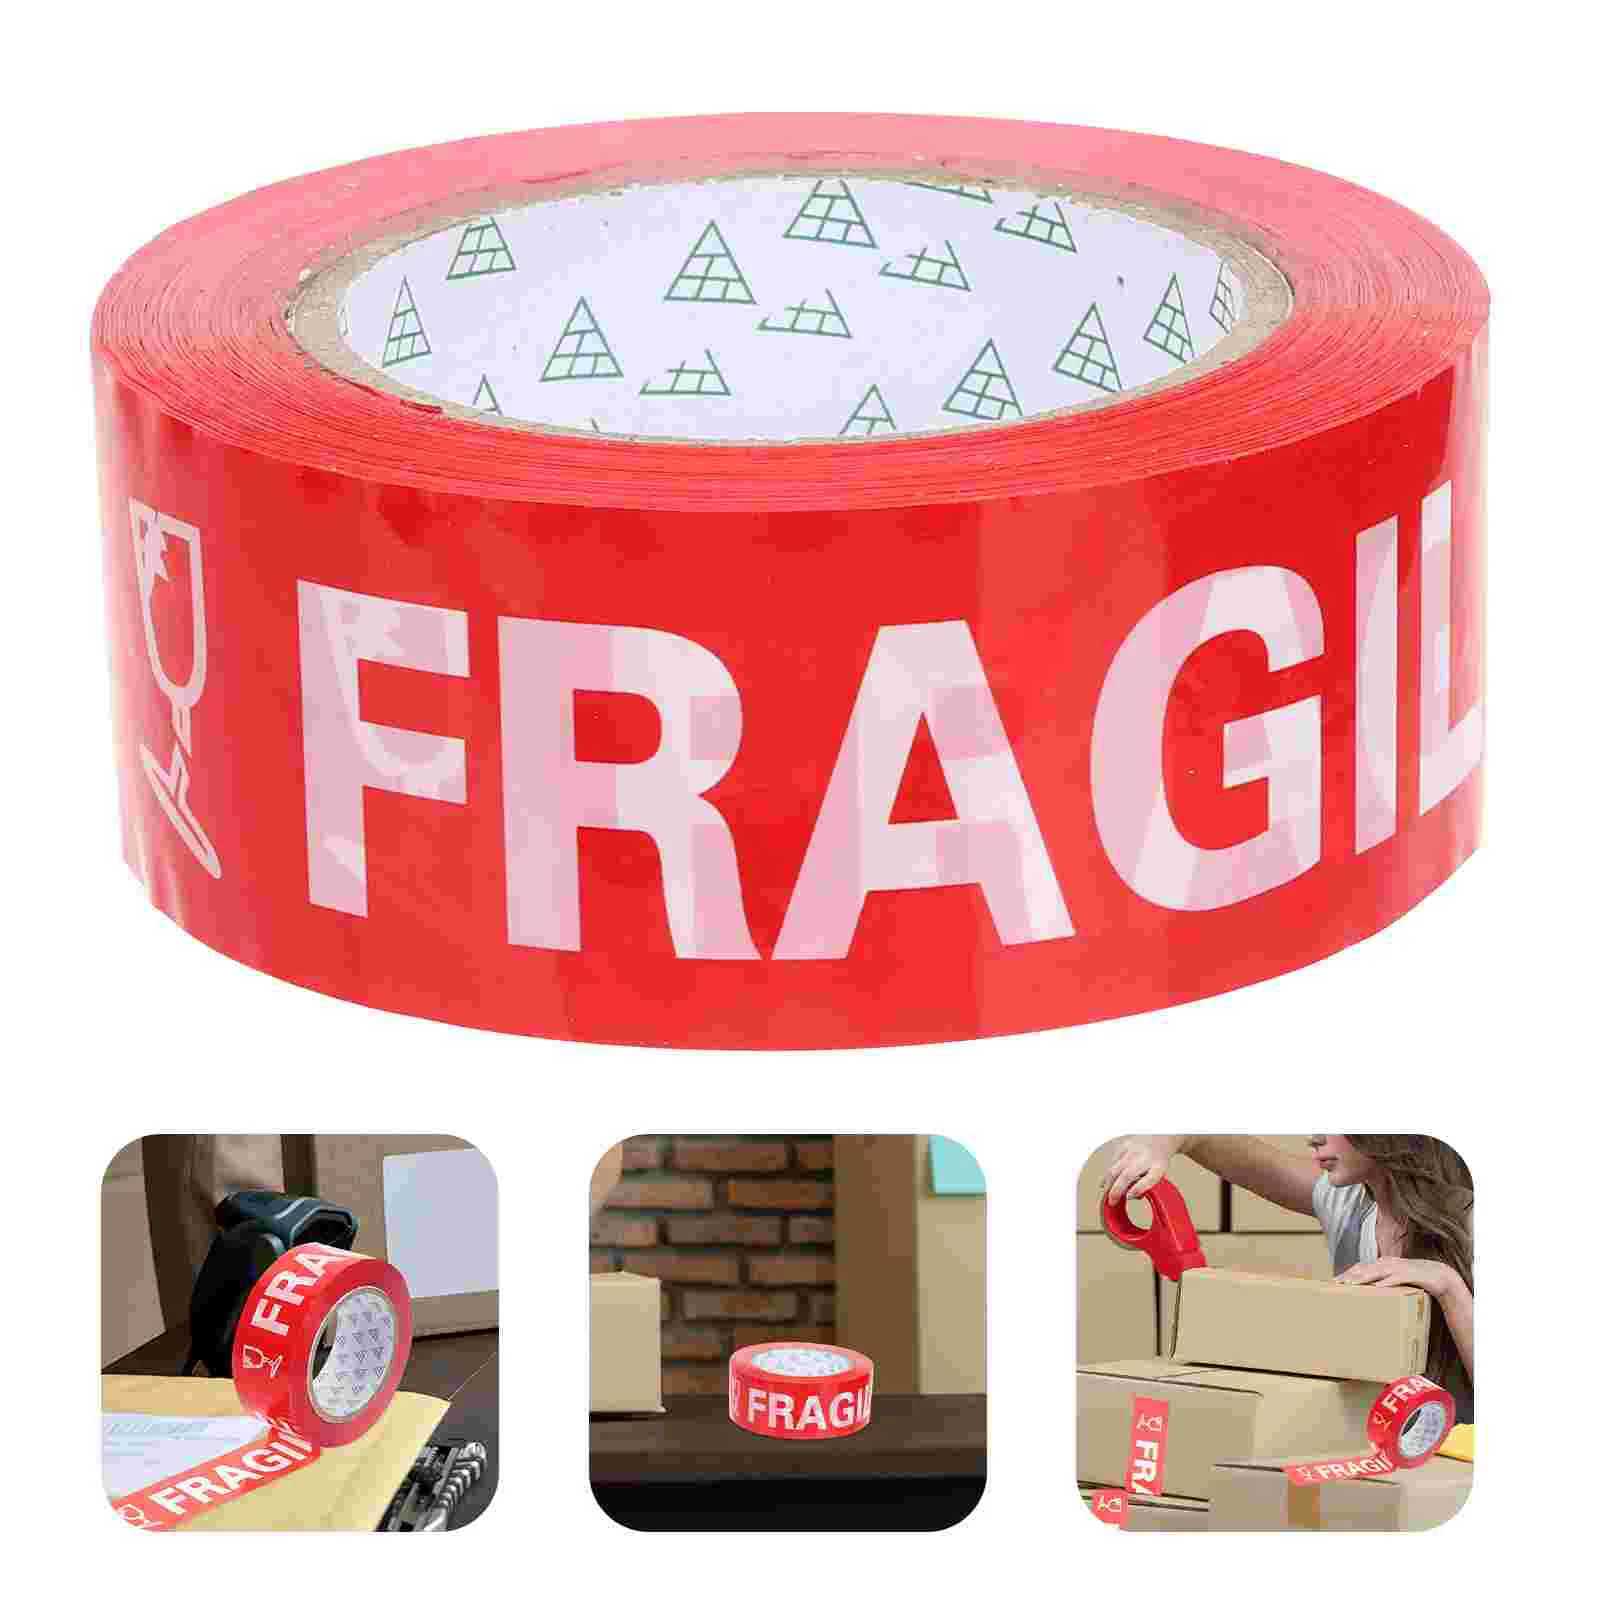 

Fragile Stickers Fragile Tape Fragile Stickers Packing Tape Warning Stickers Handle Care Heavy Duty Fragile Luggage